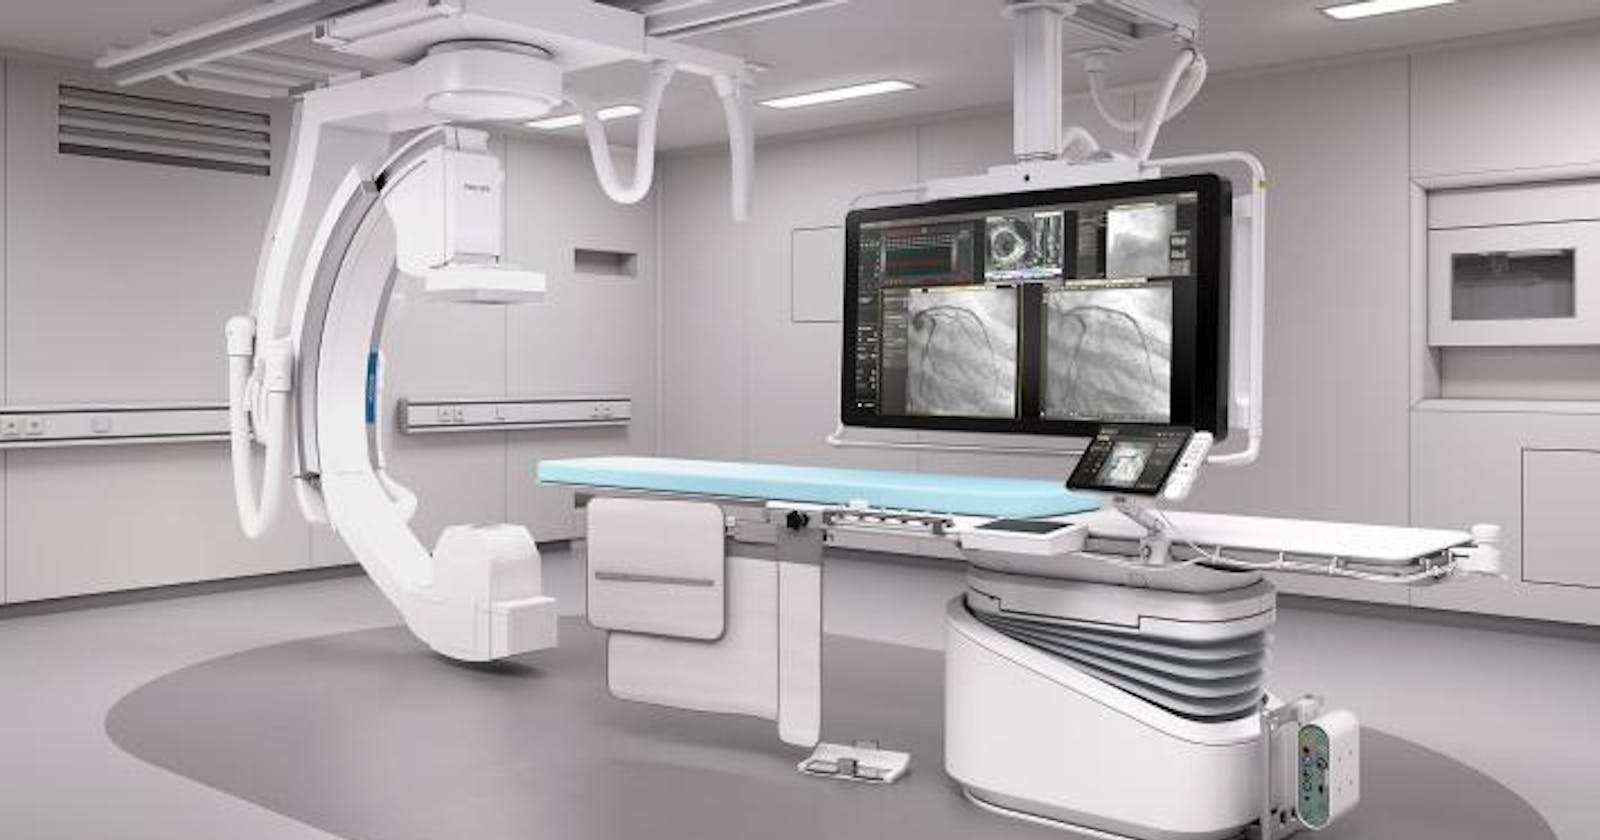 Image-guided Therapy Systems Market Report2021-26: Share, Demand and Opportunities